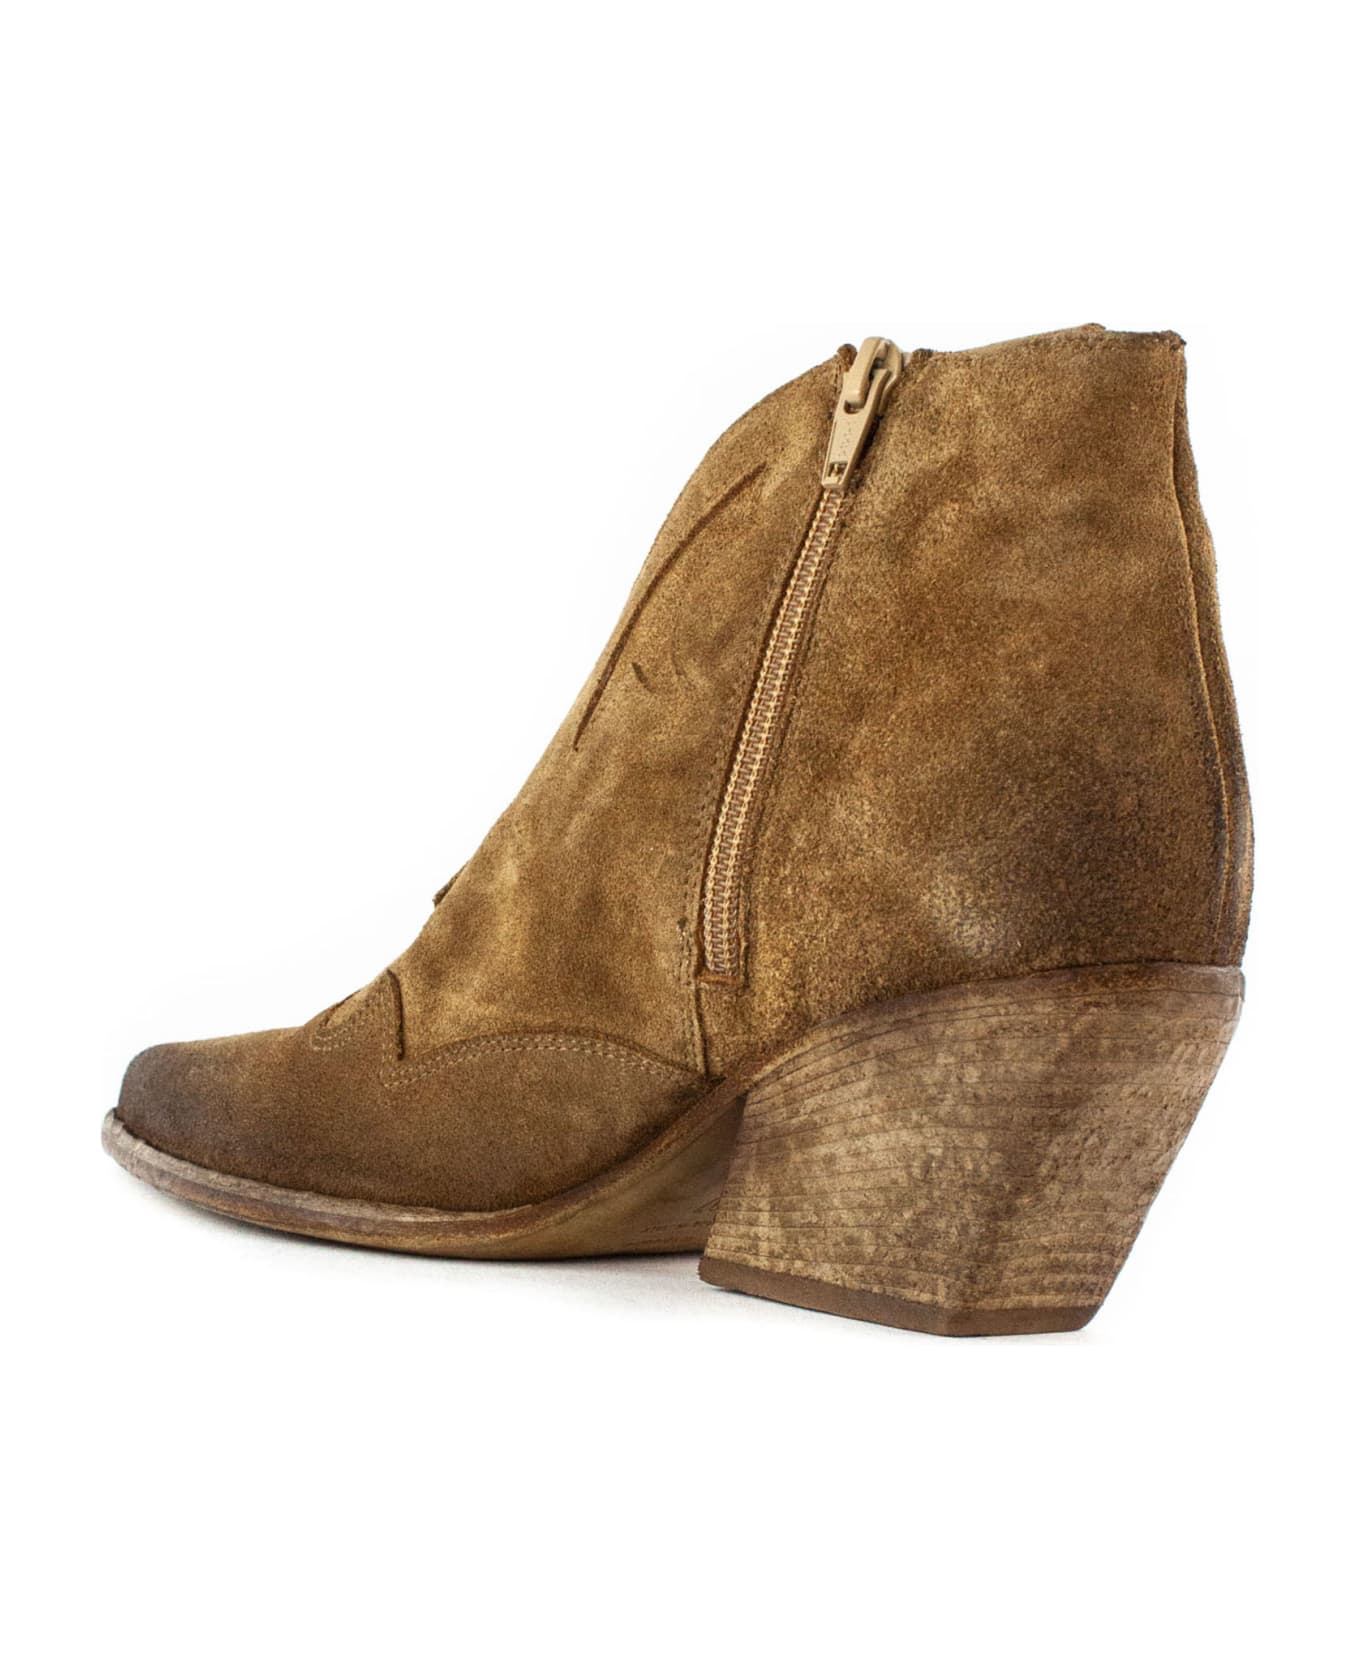 Elena Iachi Brown Suede Texan Ankle Boots - Brown